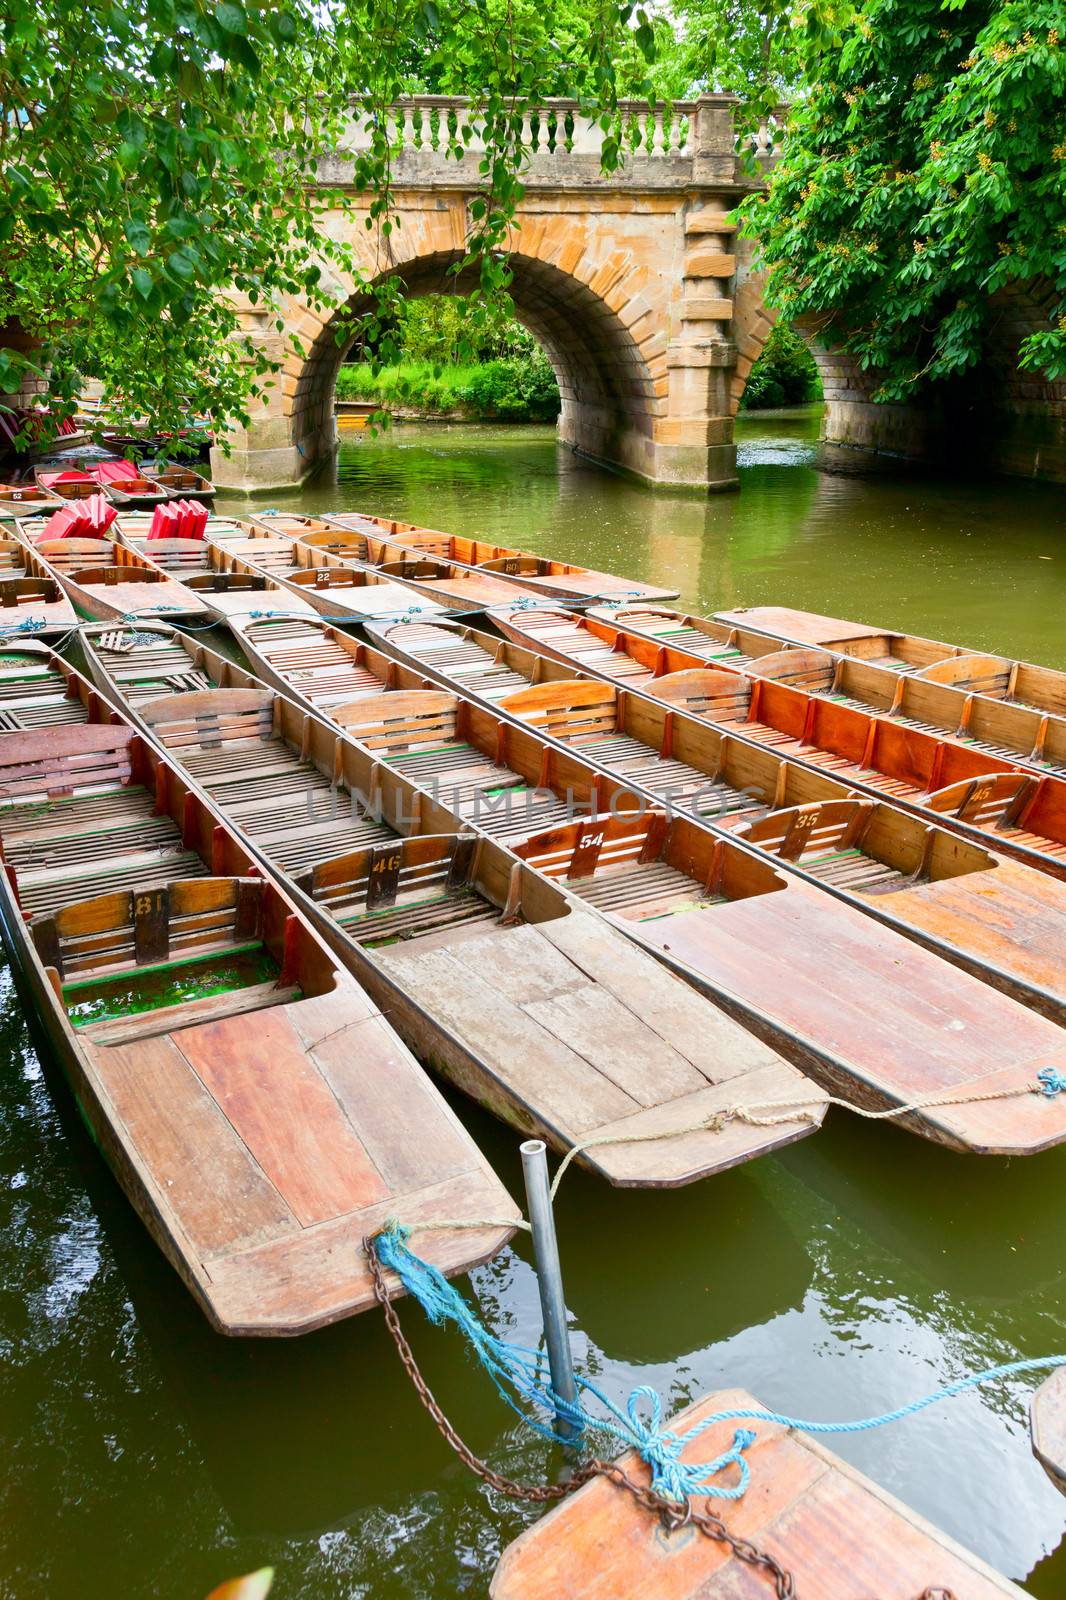 Moored punts on the river Cherwell in Oxford